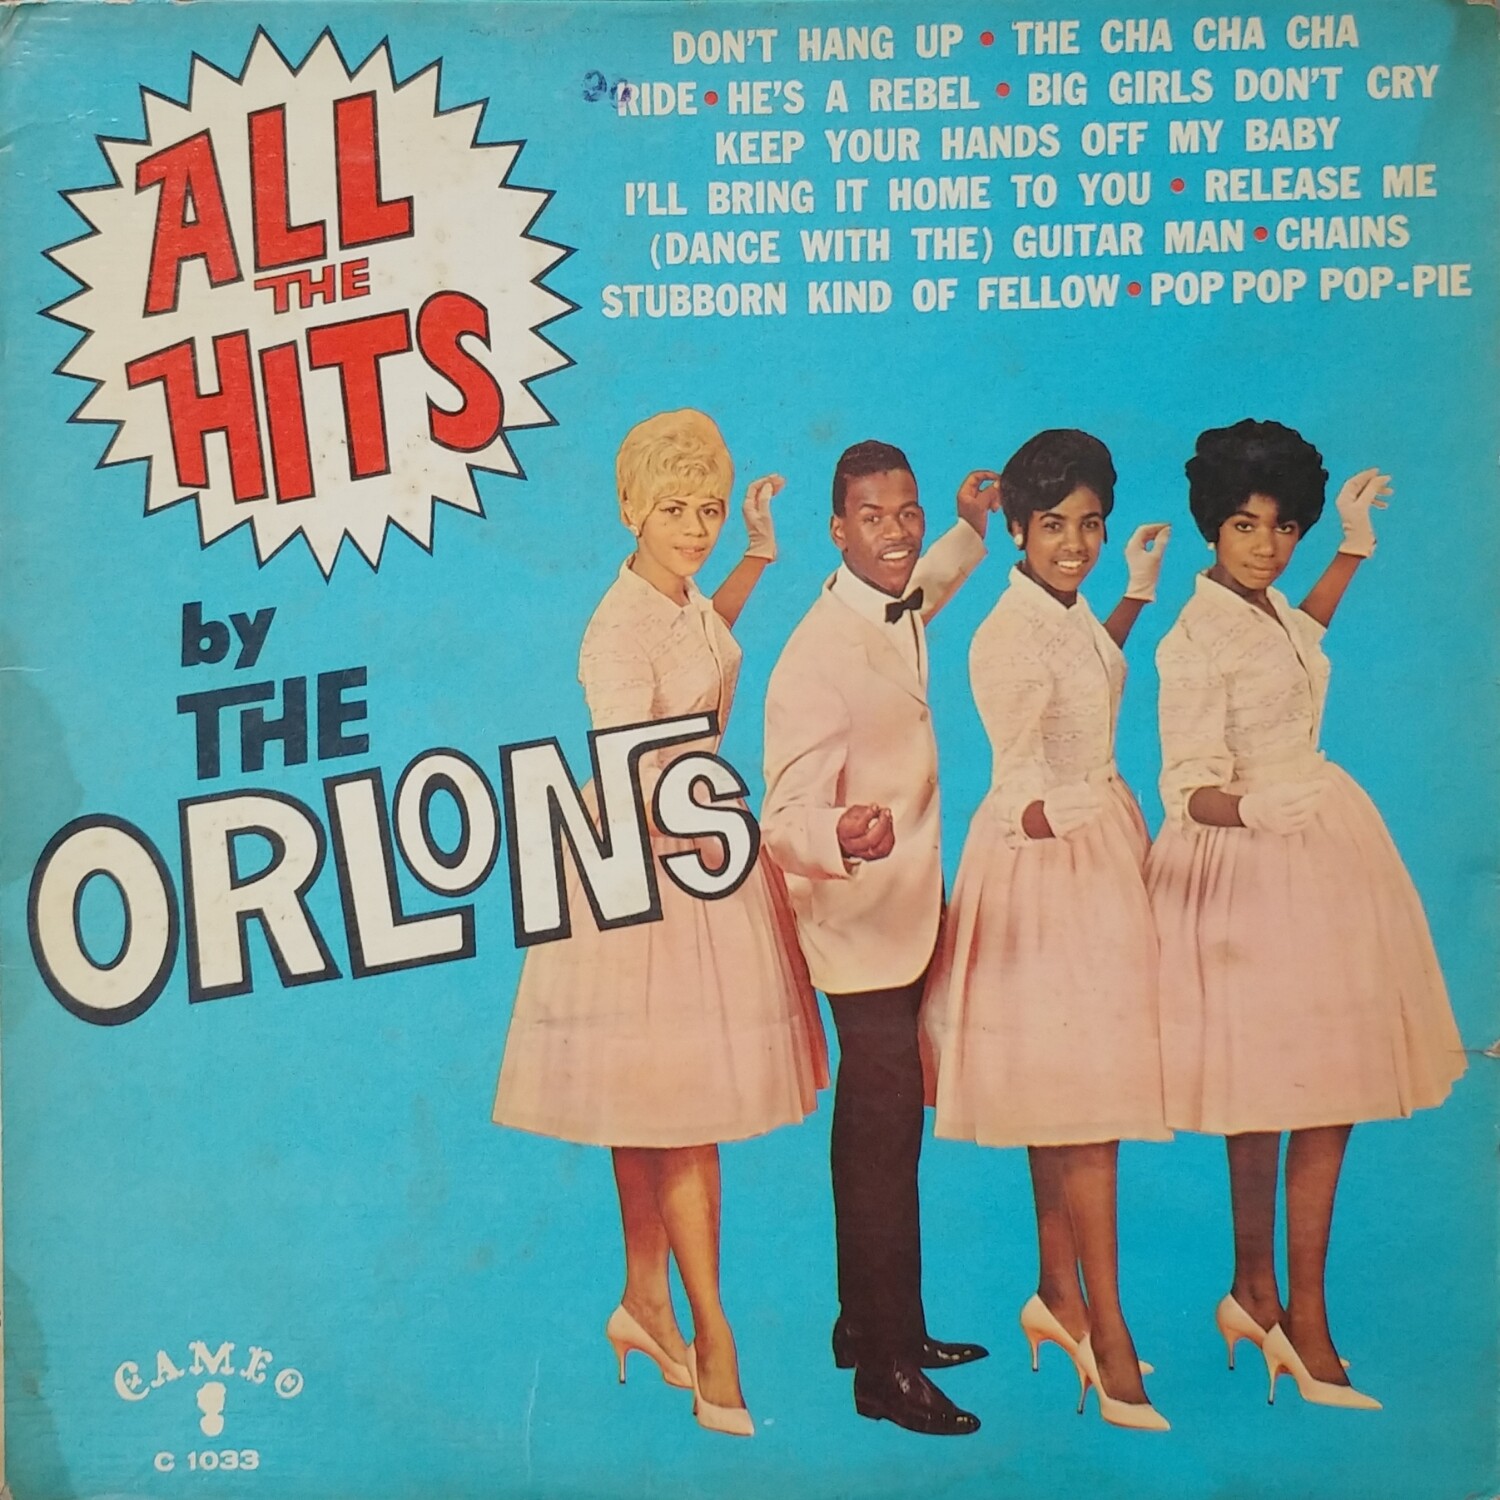 The Orlons - All the hits by The Orlons